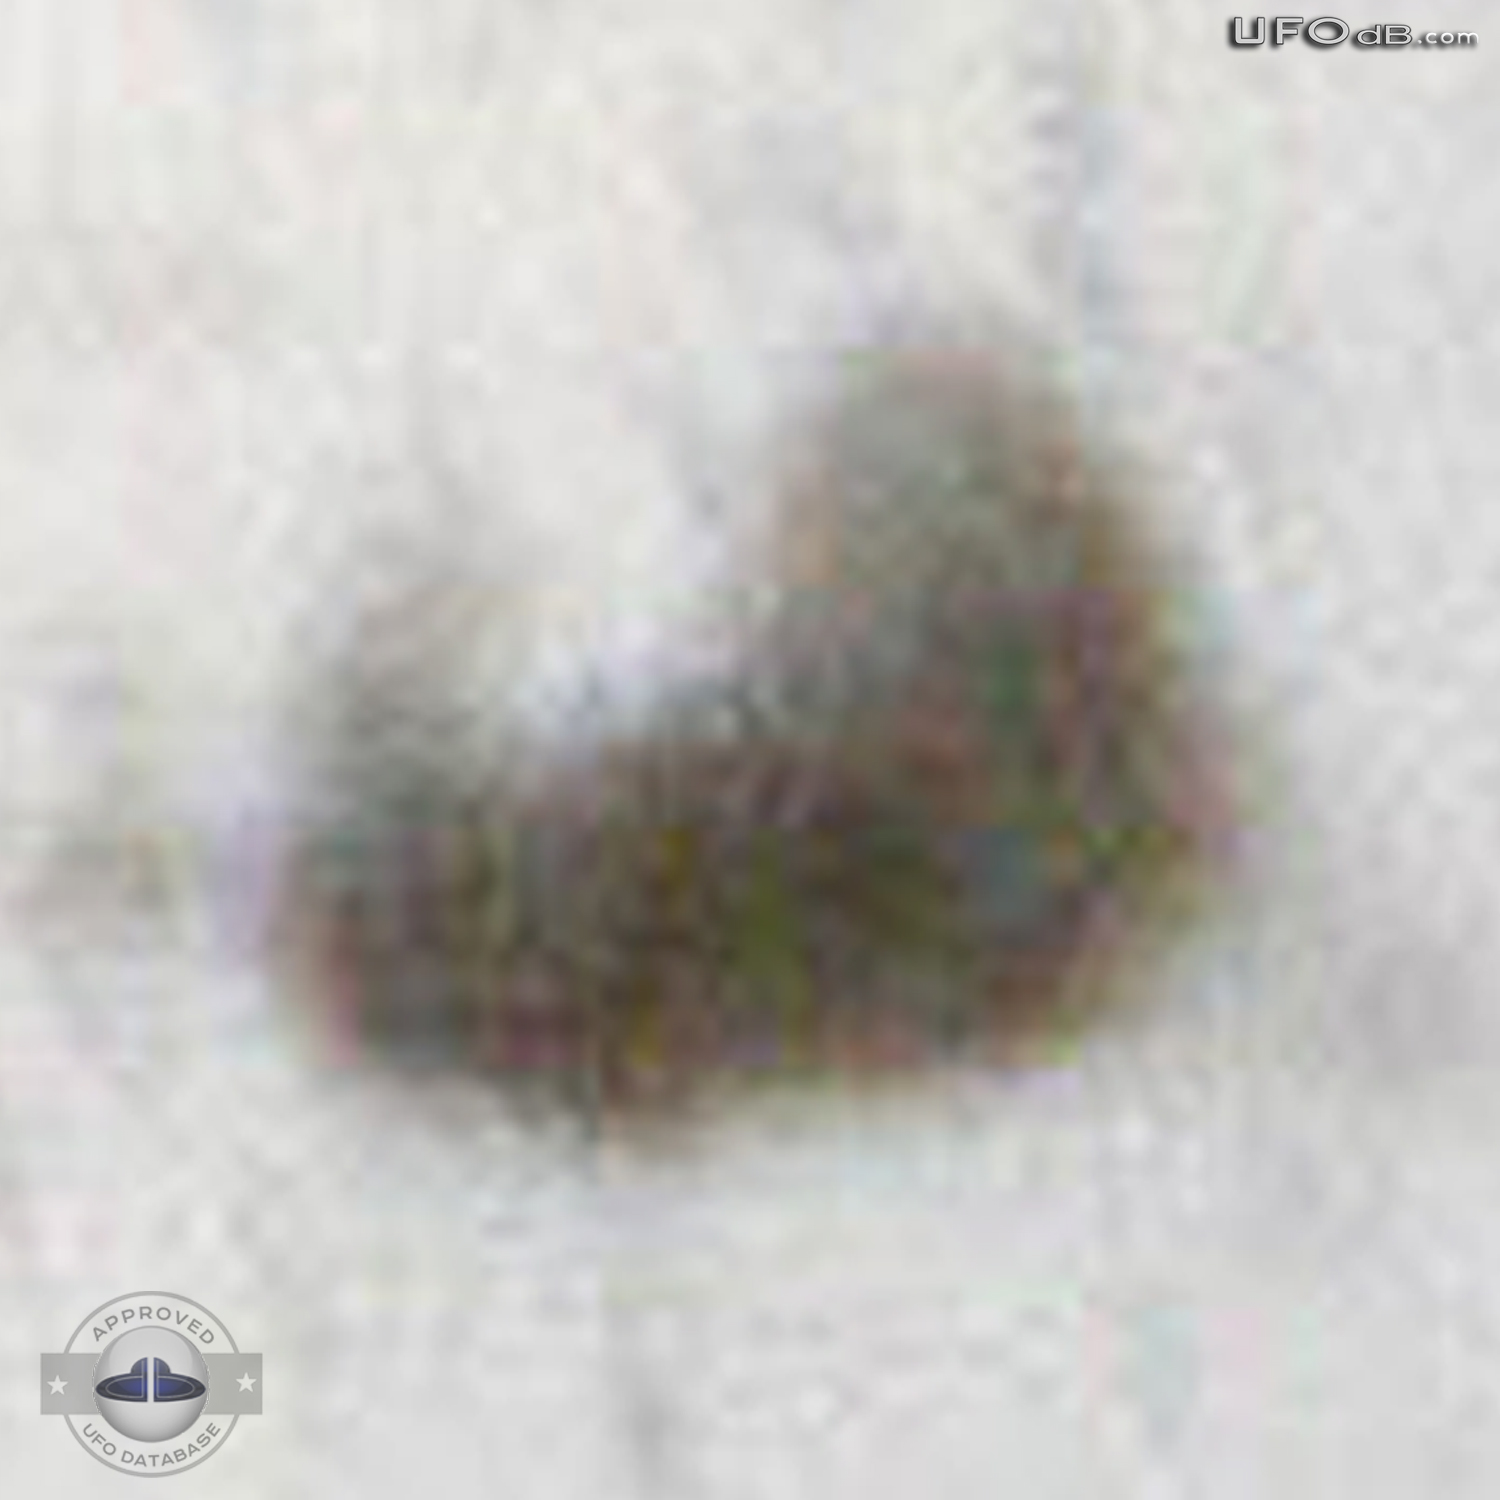 Cloaking UFO near wing of flying Airplane in Australia | January 2011 UFO Picture #243-6